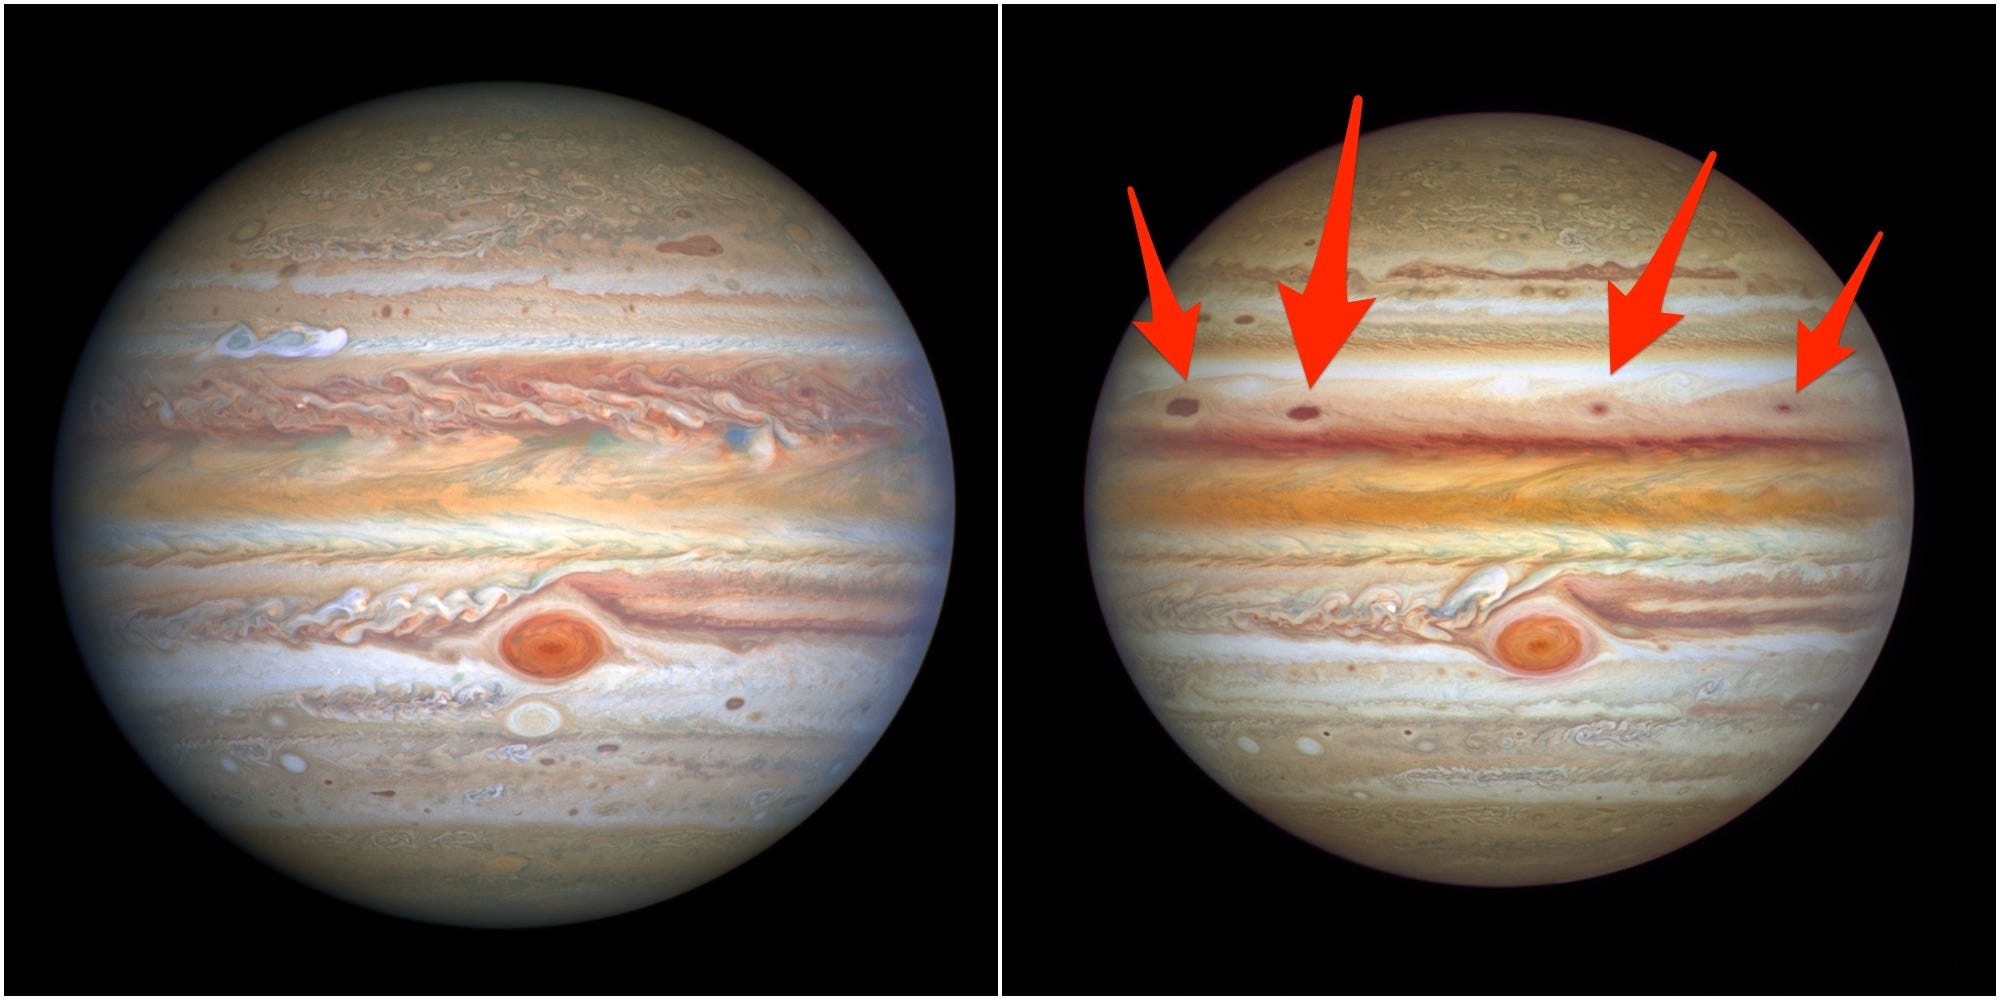 arrows shows the new storms on a picture of Jupiter on 2021 taken by Hubble telescope.